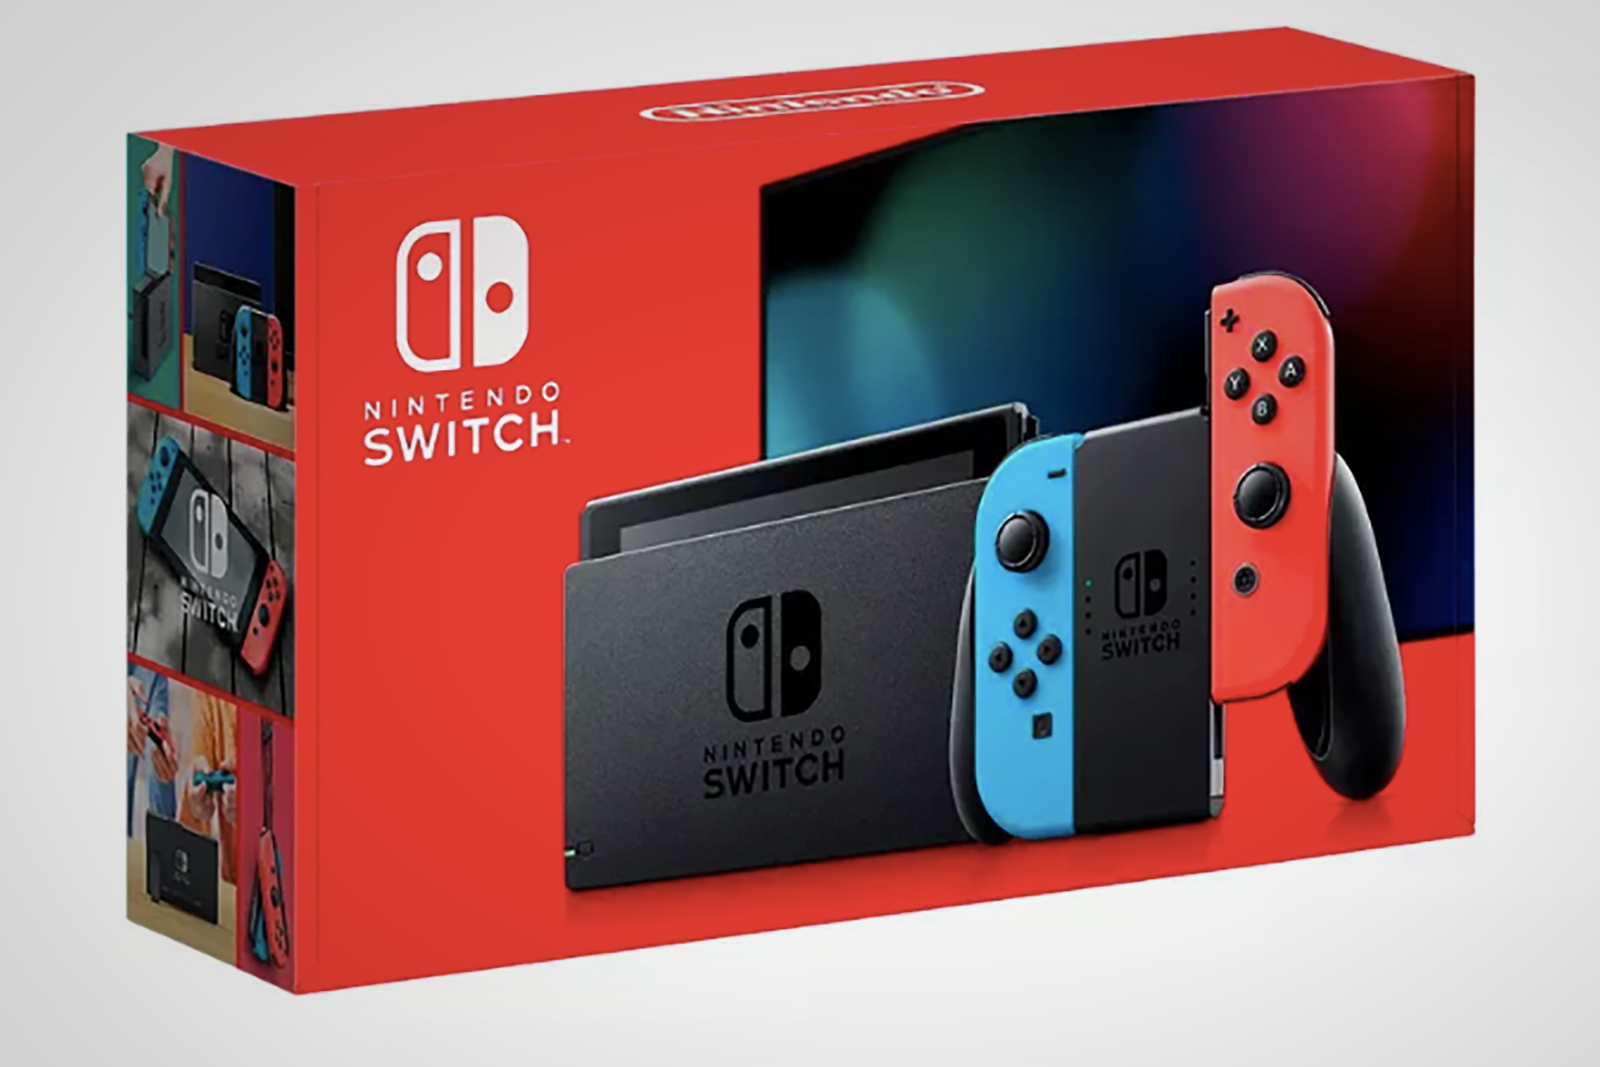 Nintendo Switch: How to tell the new model from the old one